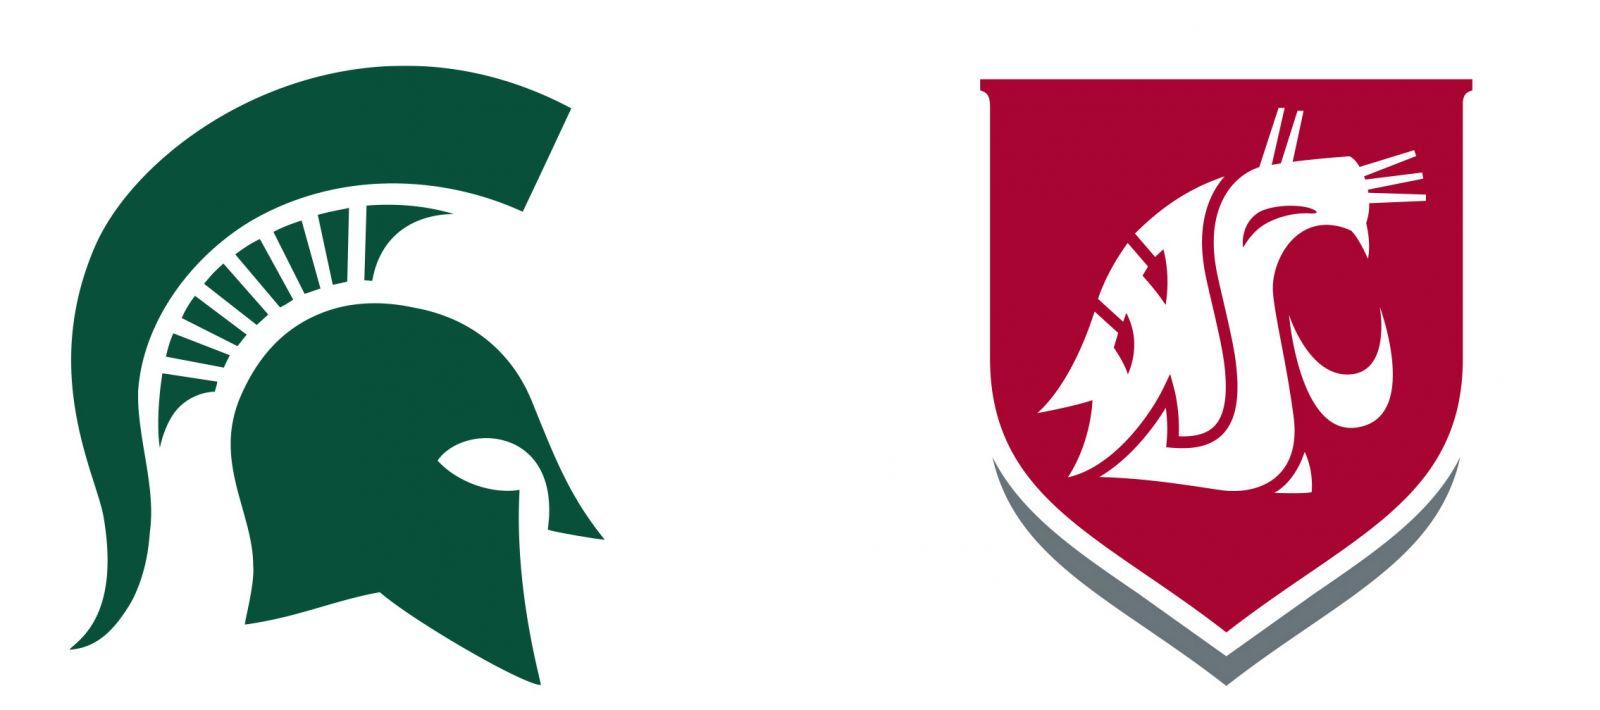 Academic Logo - Merging Athletic and Academic Logos. Call to Action: Marketing